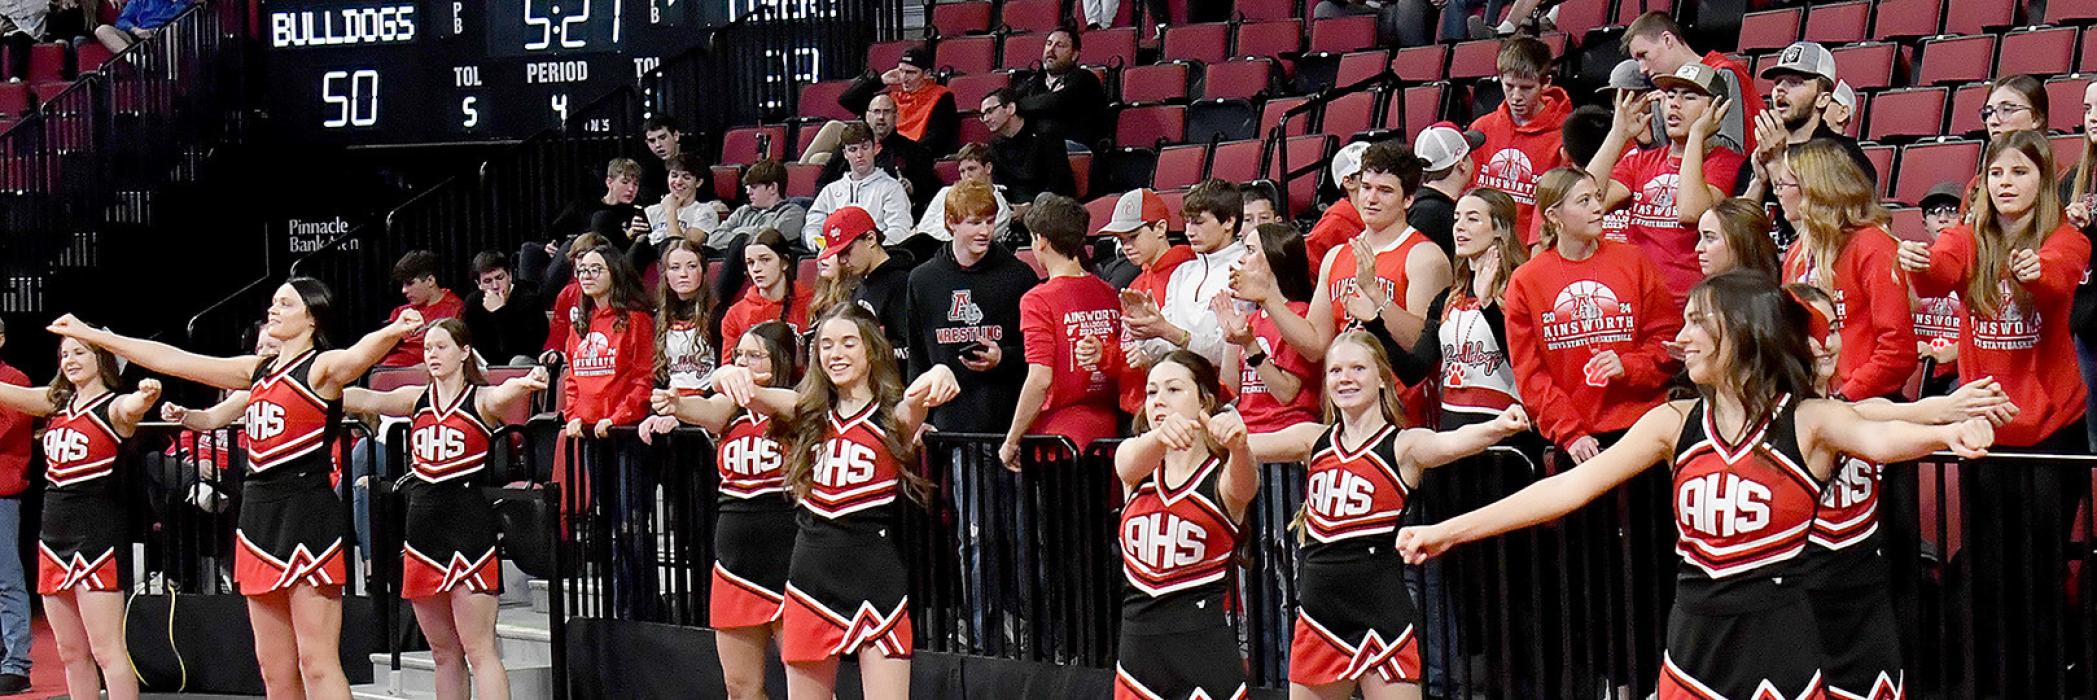 The Ainsworth Bulldog Cheerleaders led the AHS student body in cheers through all three days of the State Basketball Tournament.